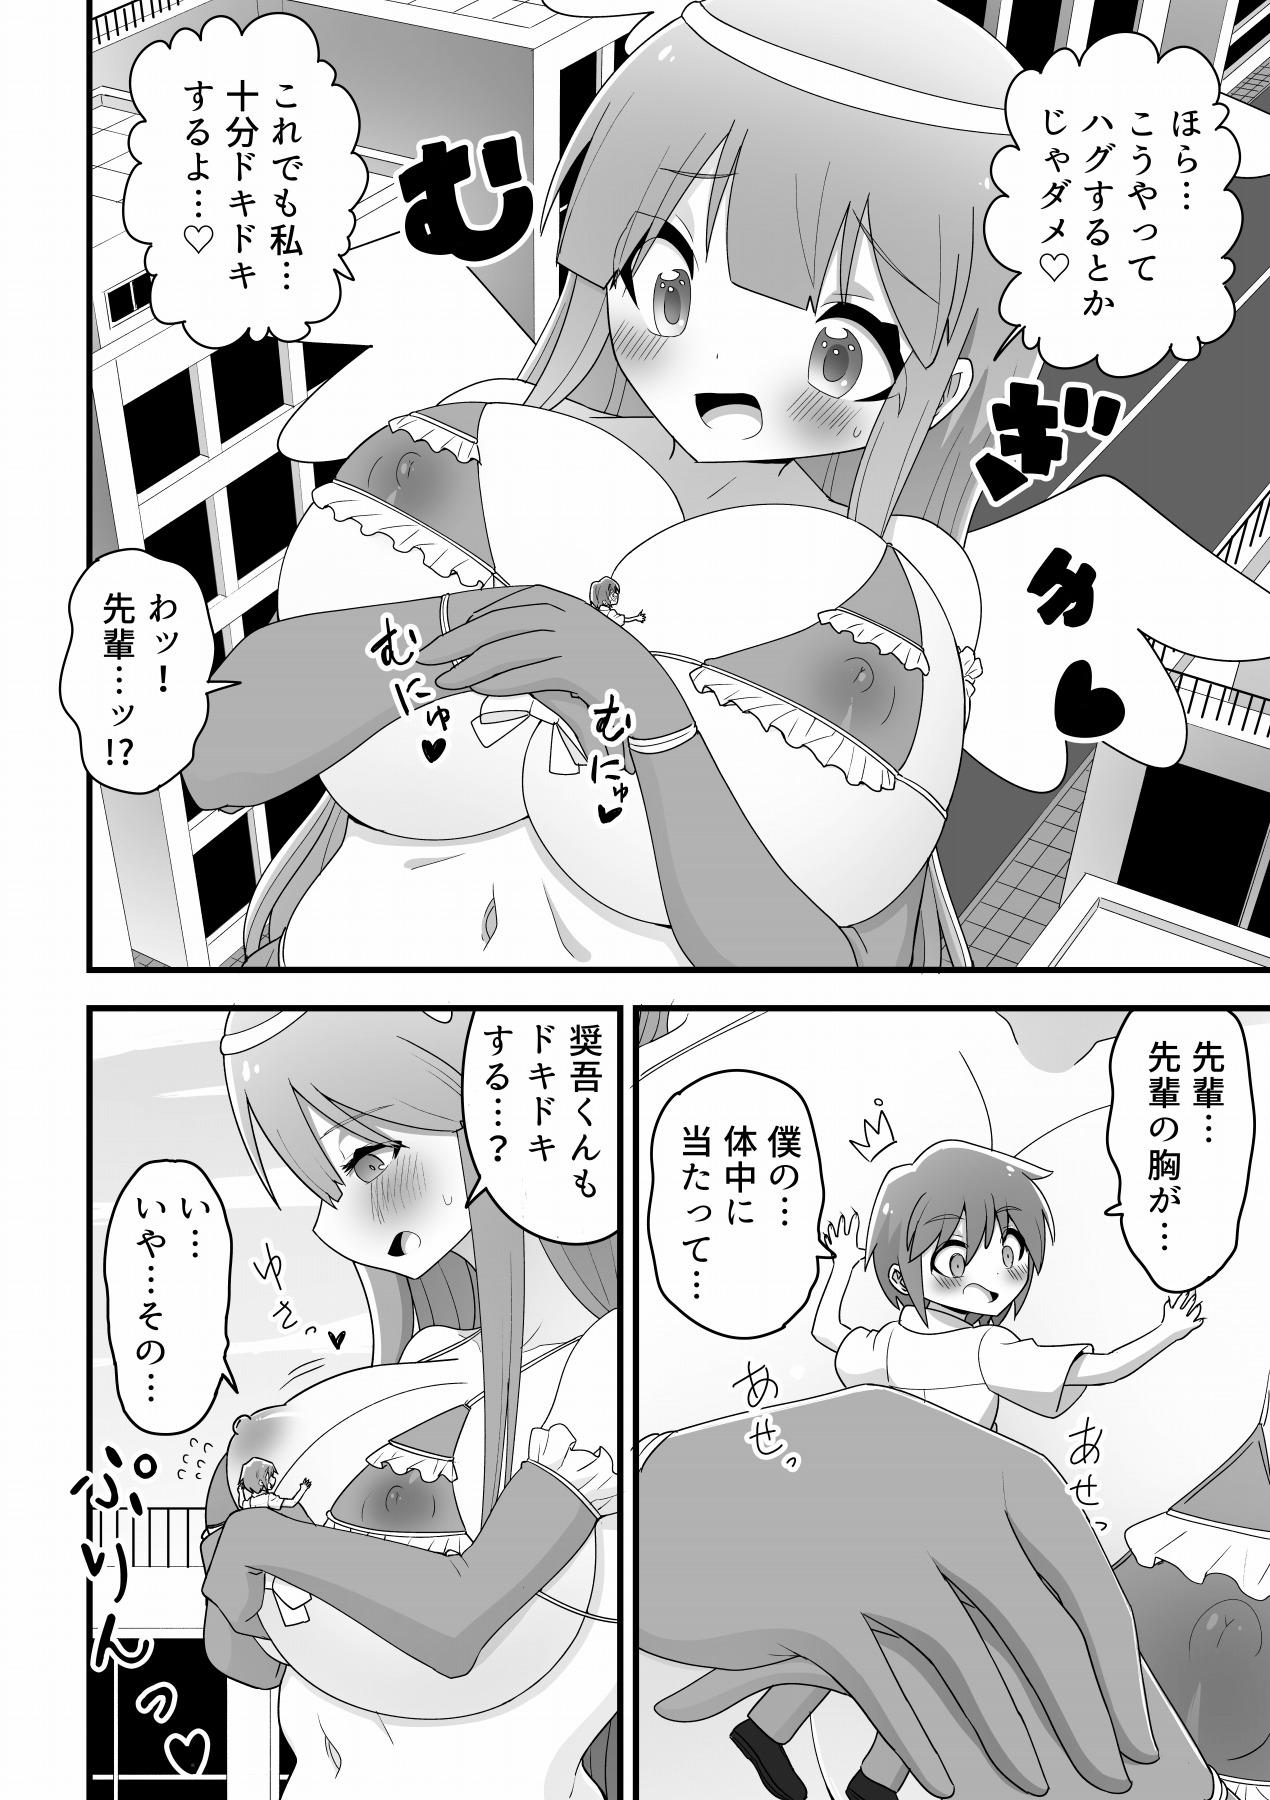 Bwc A story about an ordinary school girl becoming a giant magical girl and having sex with a junior boy to save the world - Original Morocha - Page 8